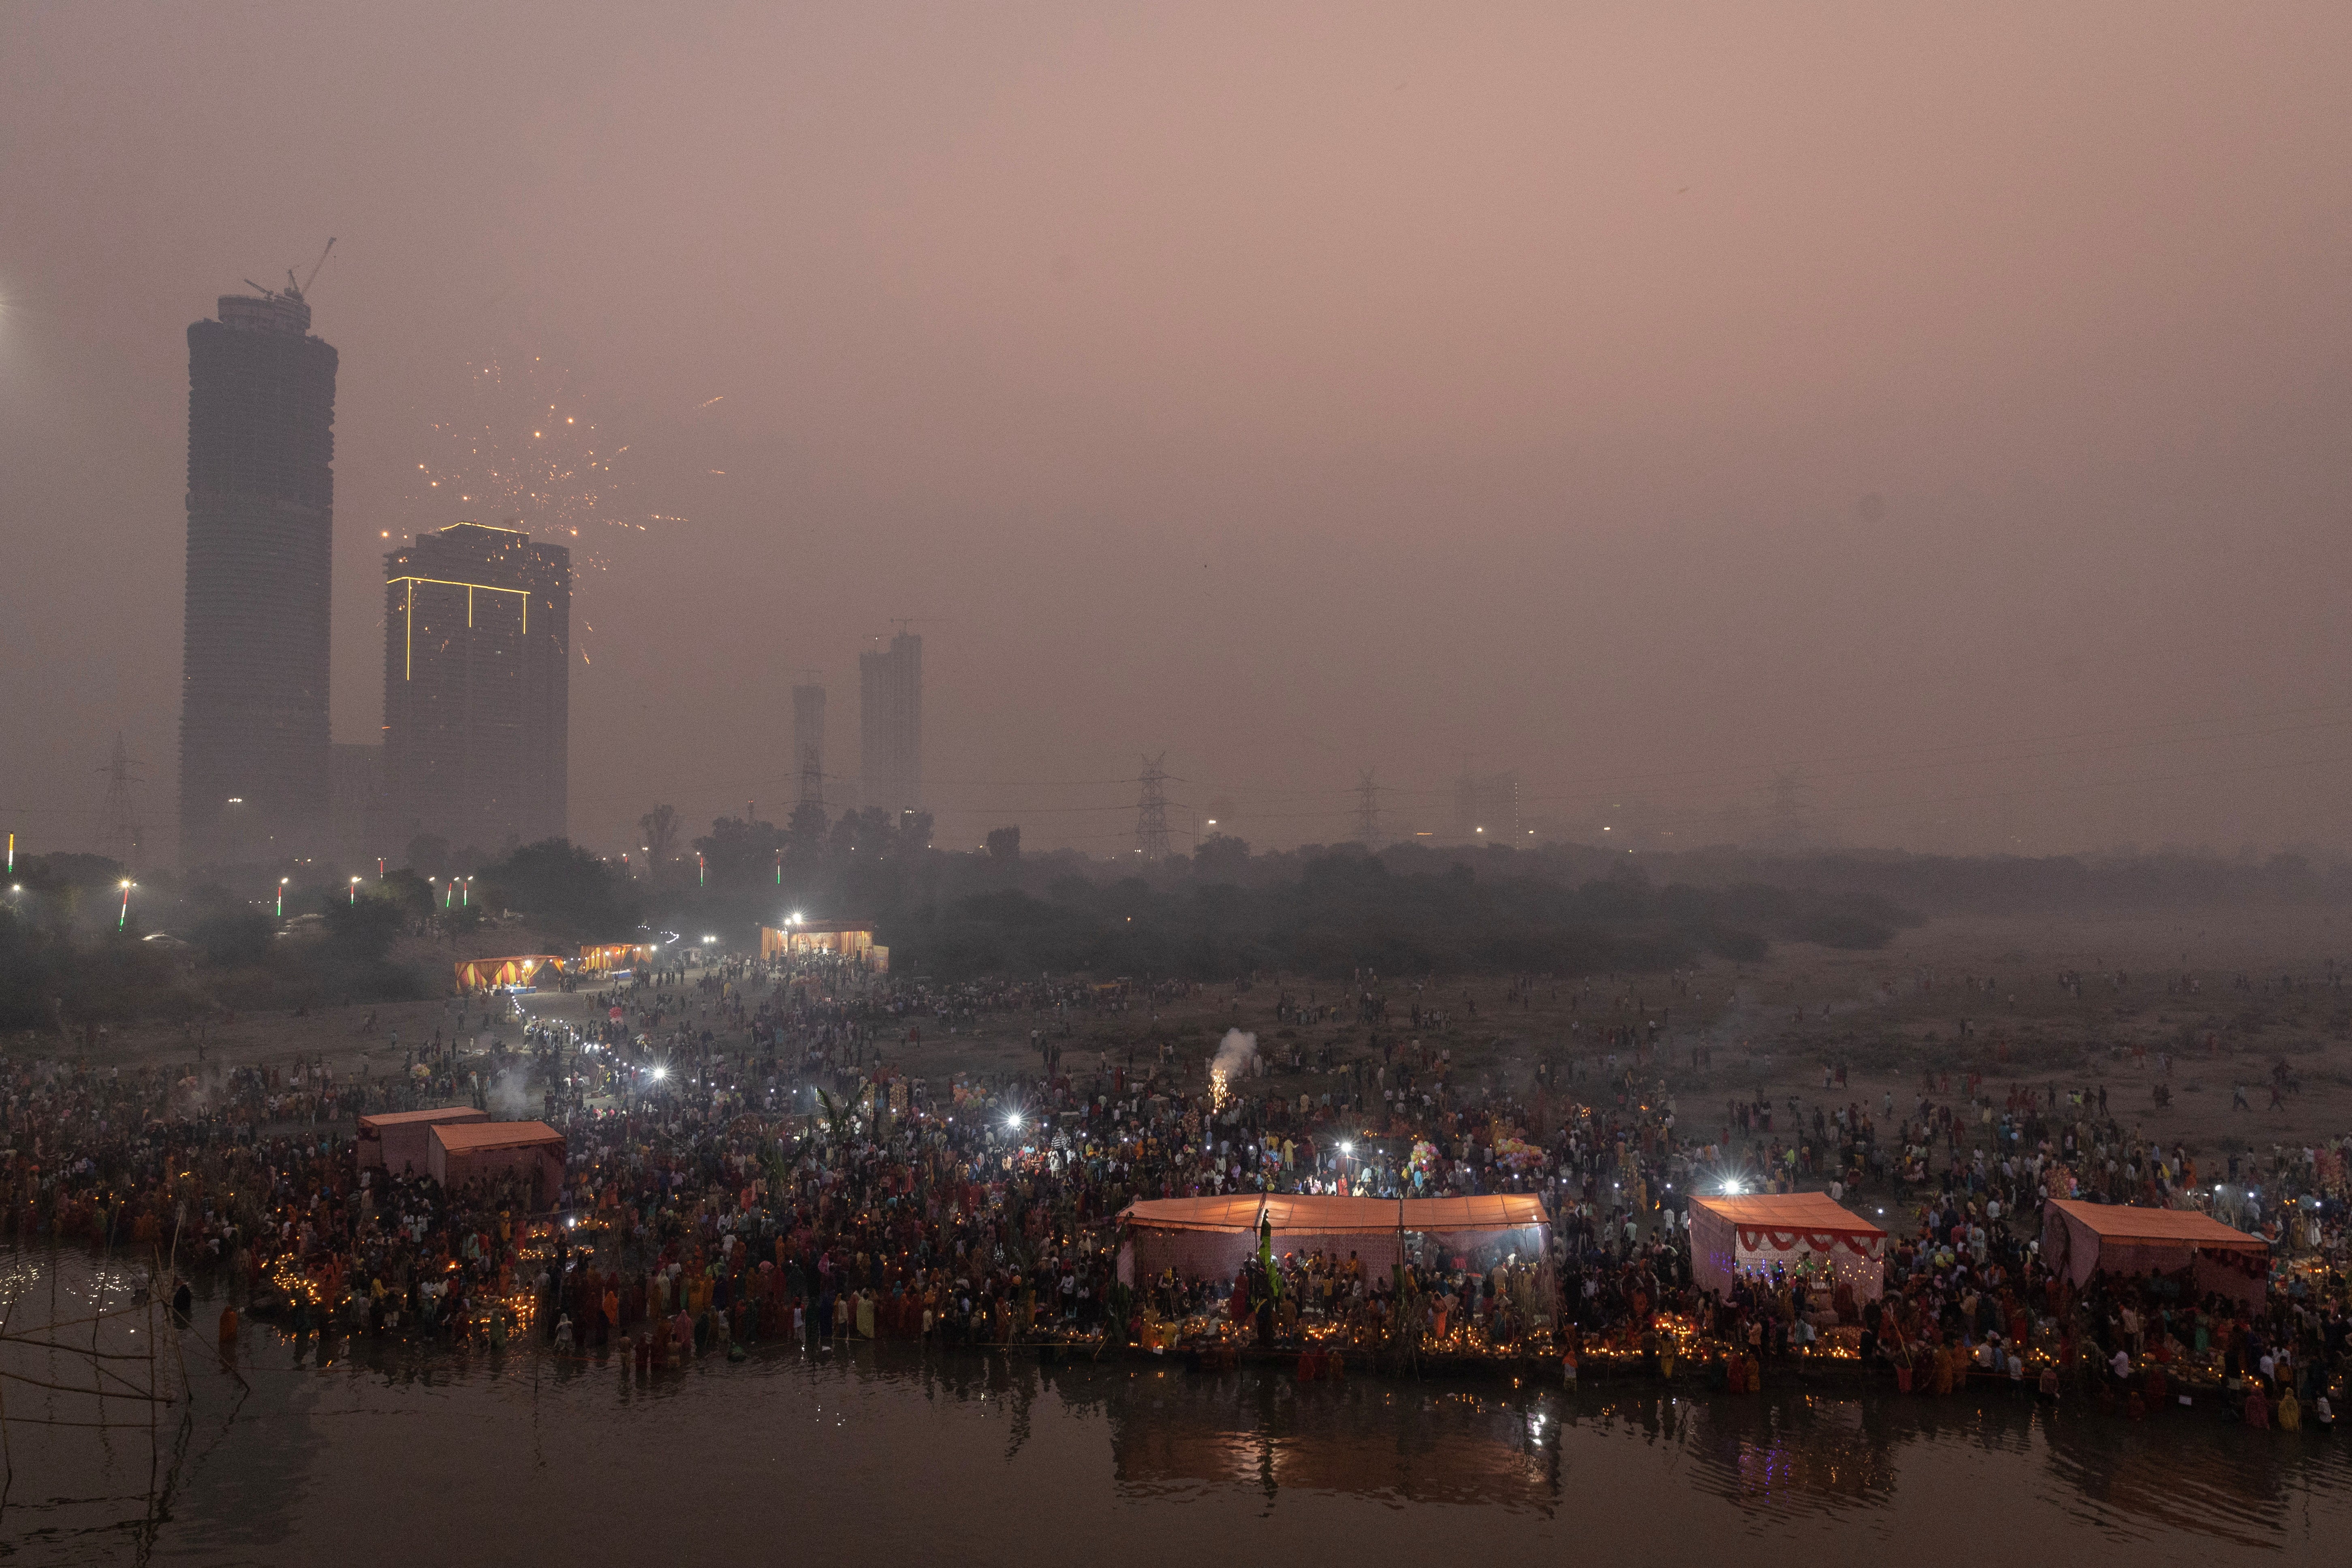 Hindu devotees gather to worship the sun god Surya in the early morning during the Hindu festival of Chhath Puja